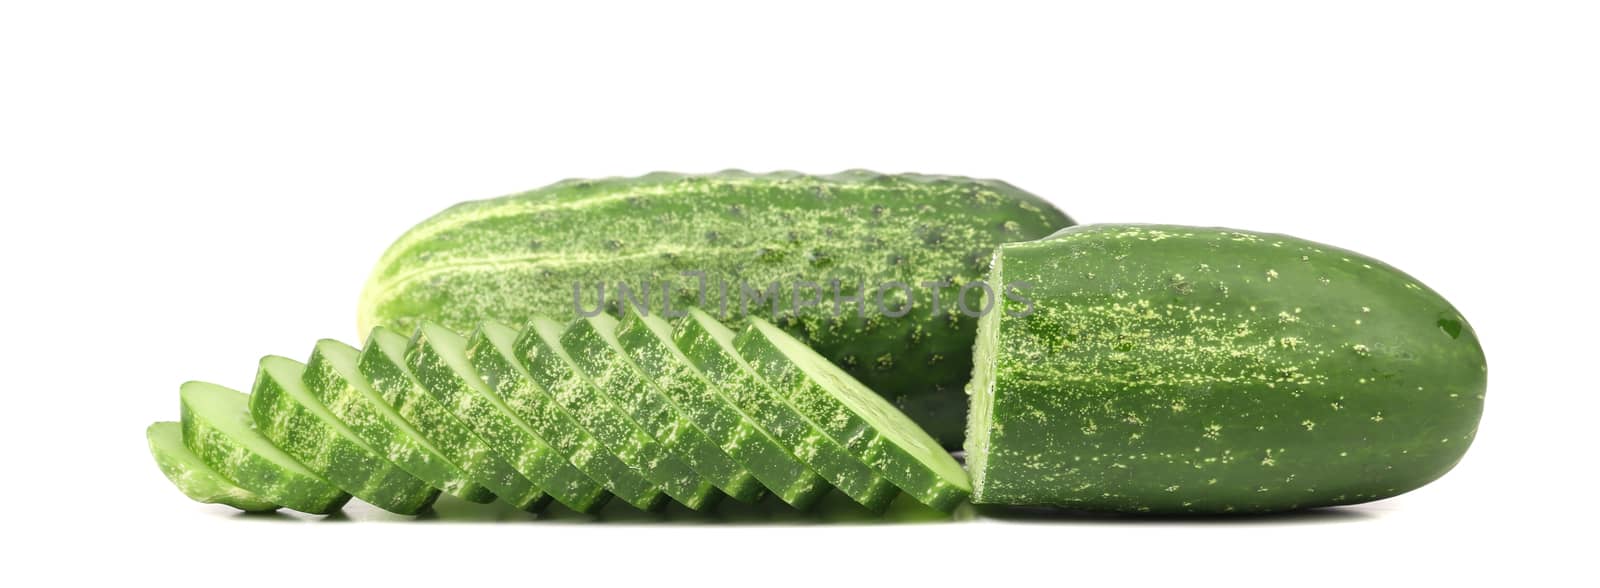 Fresh cucumbers and slices. Isolated on a white background